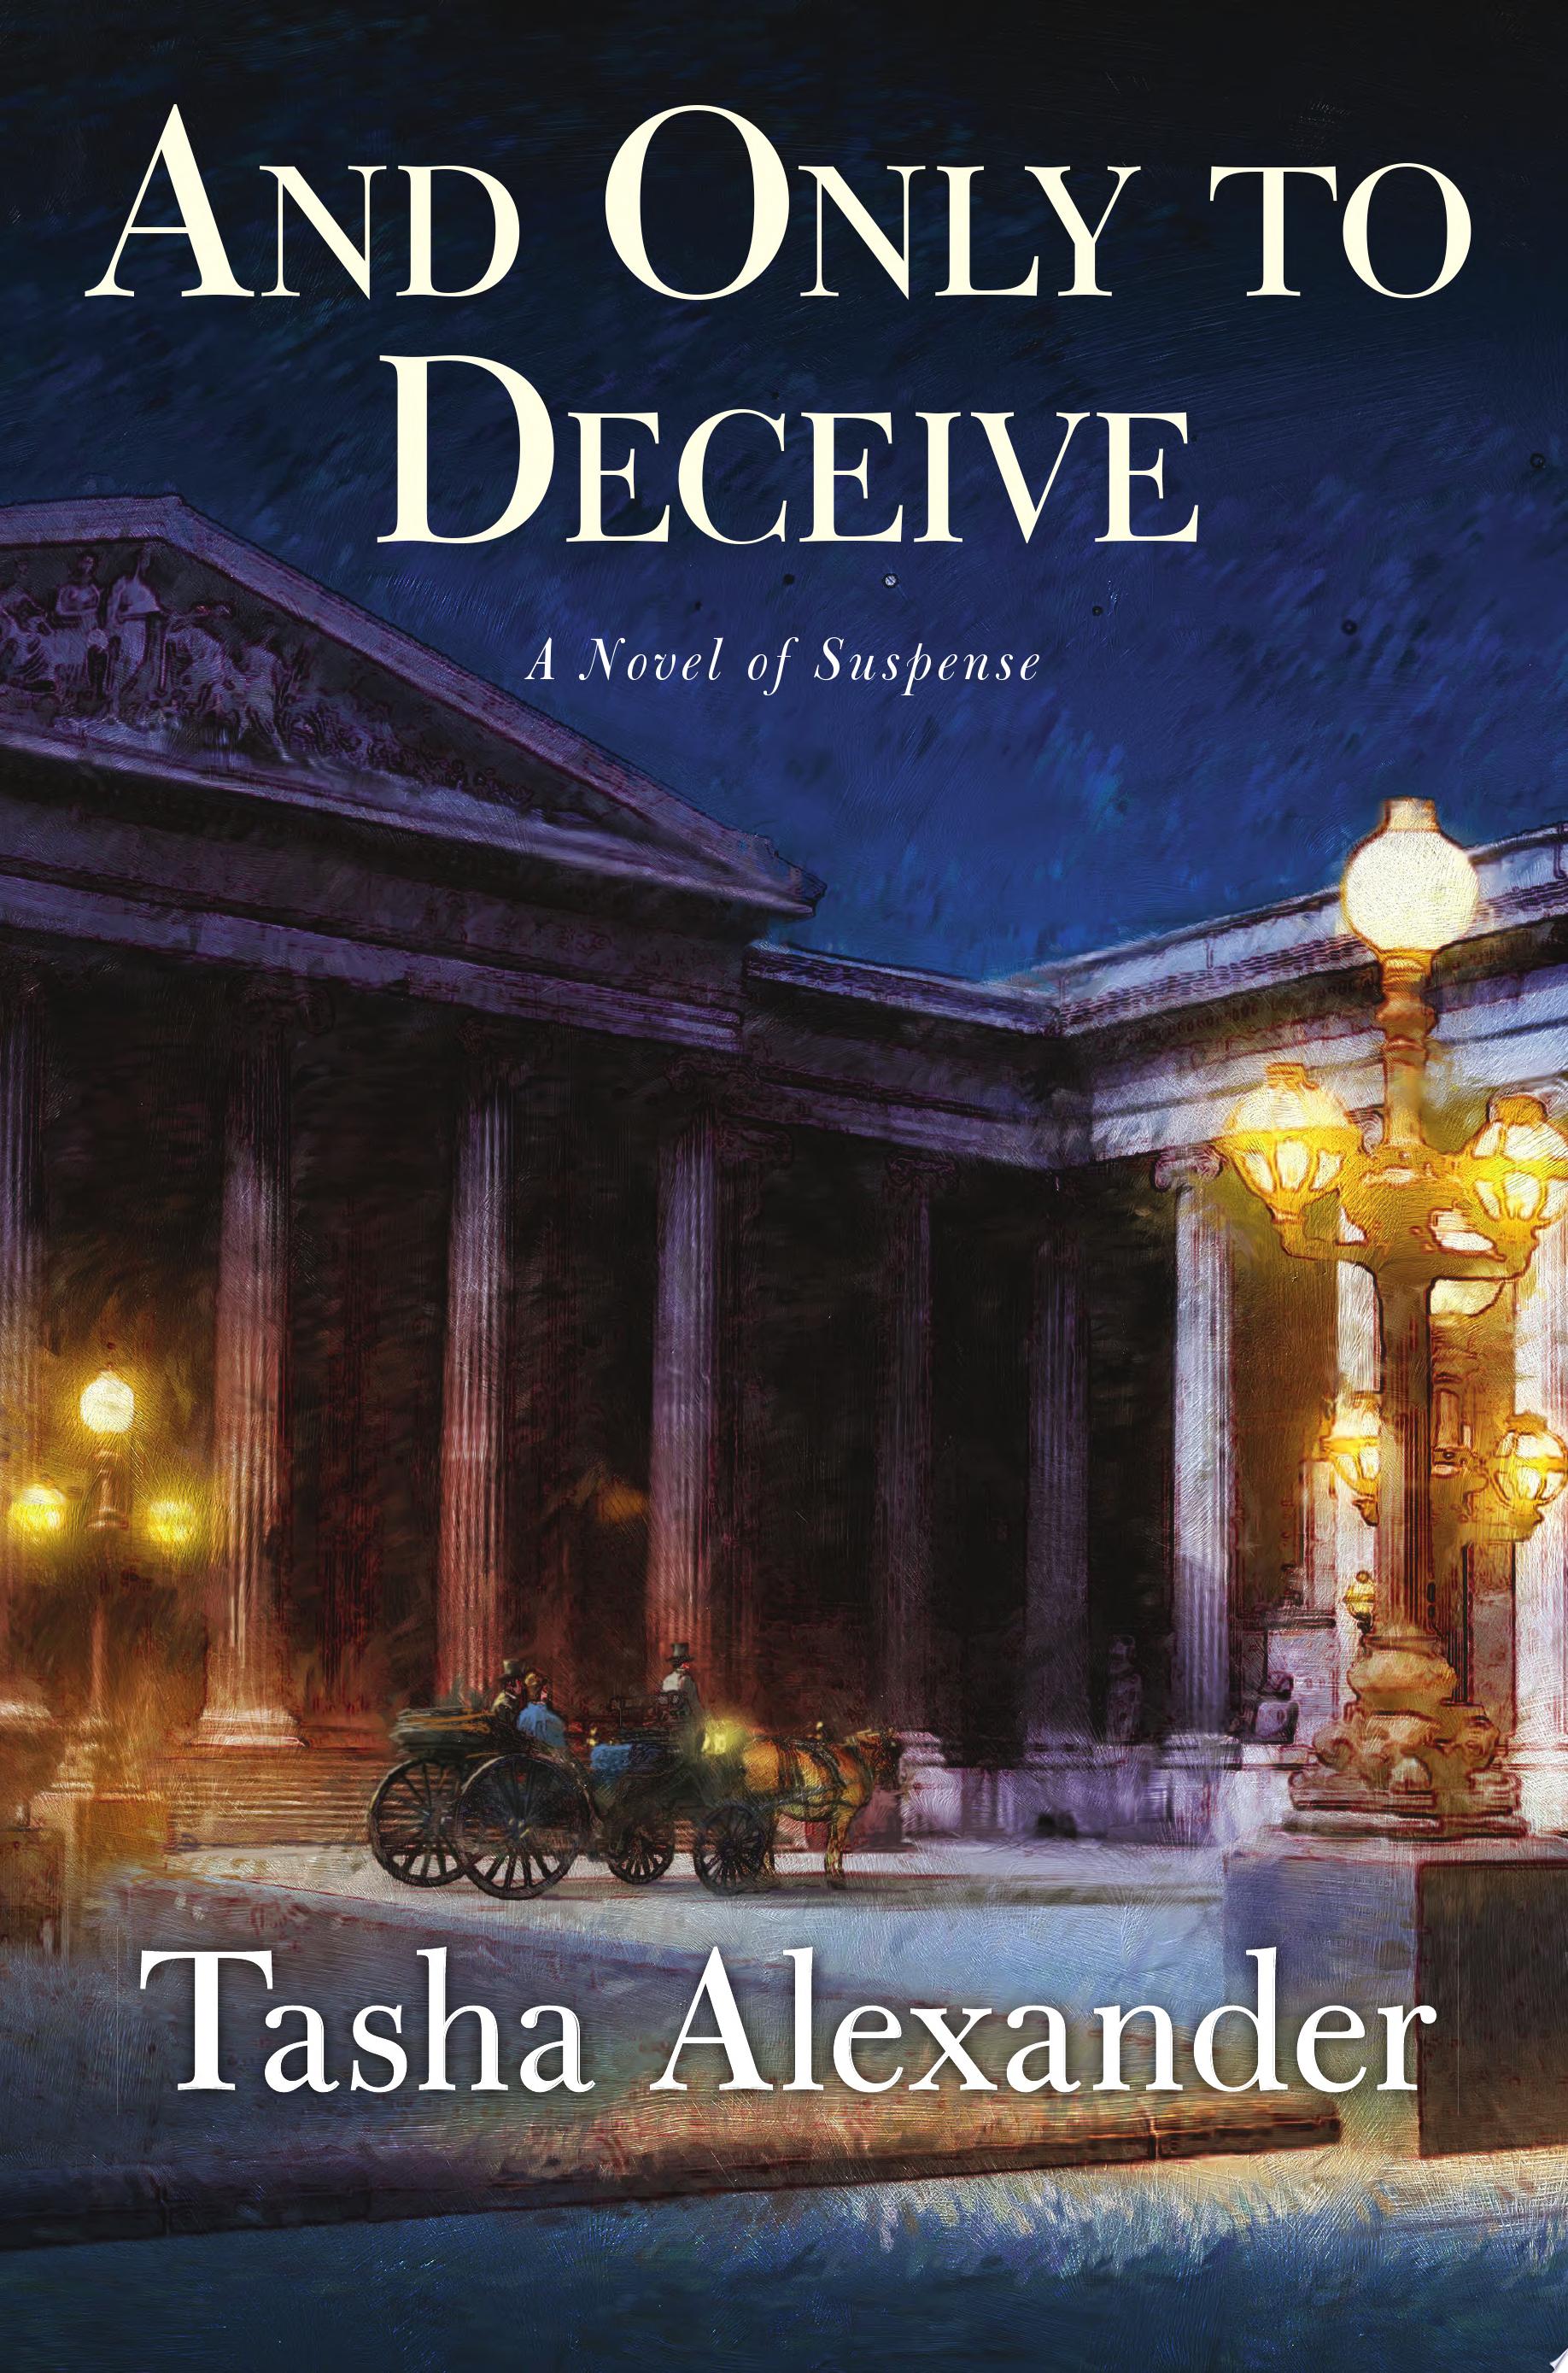 Image for "And Only to Deceive"